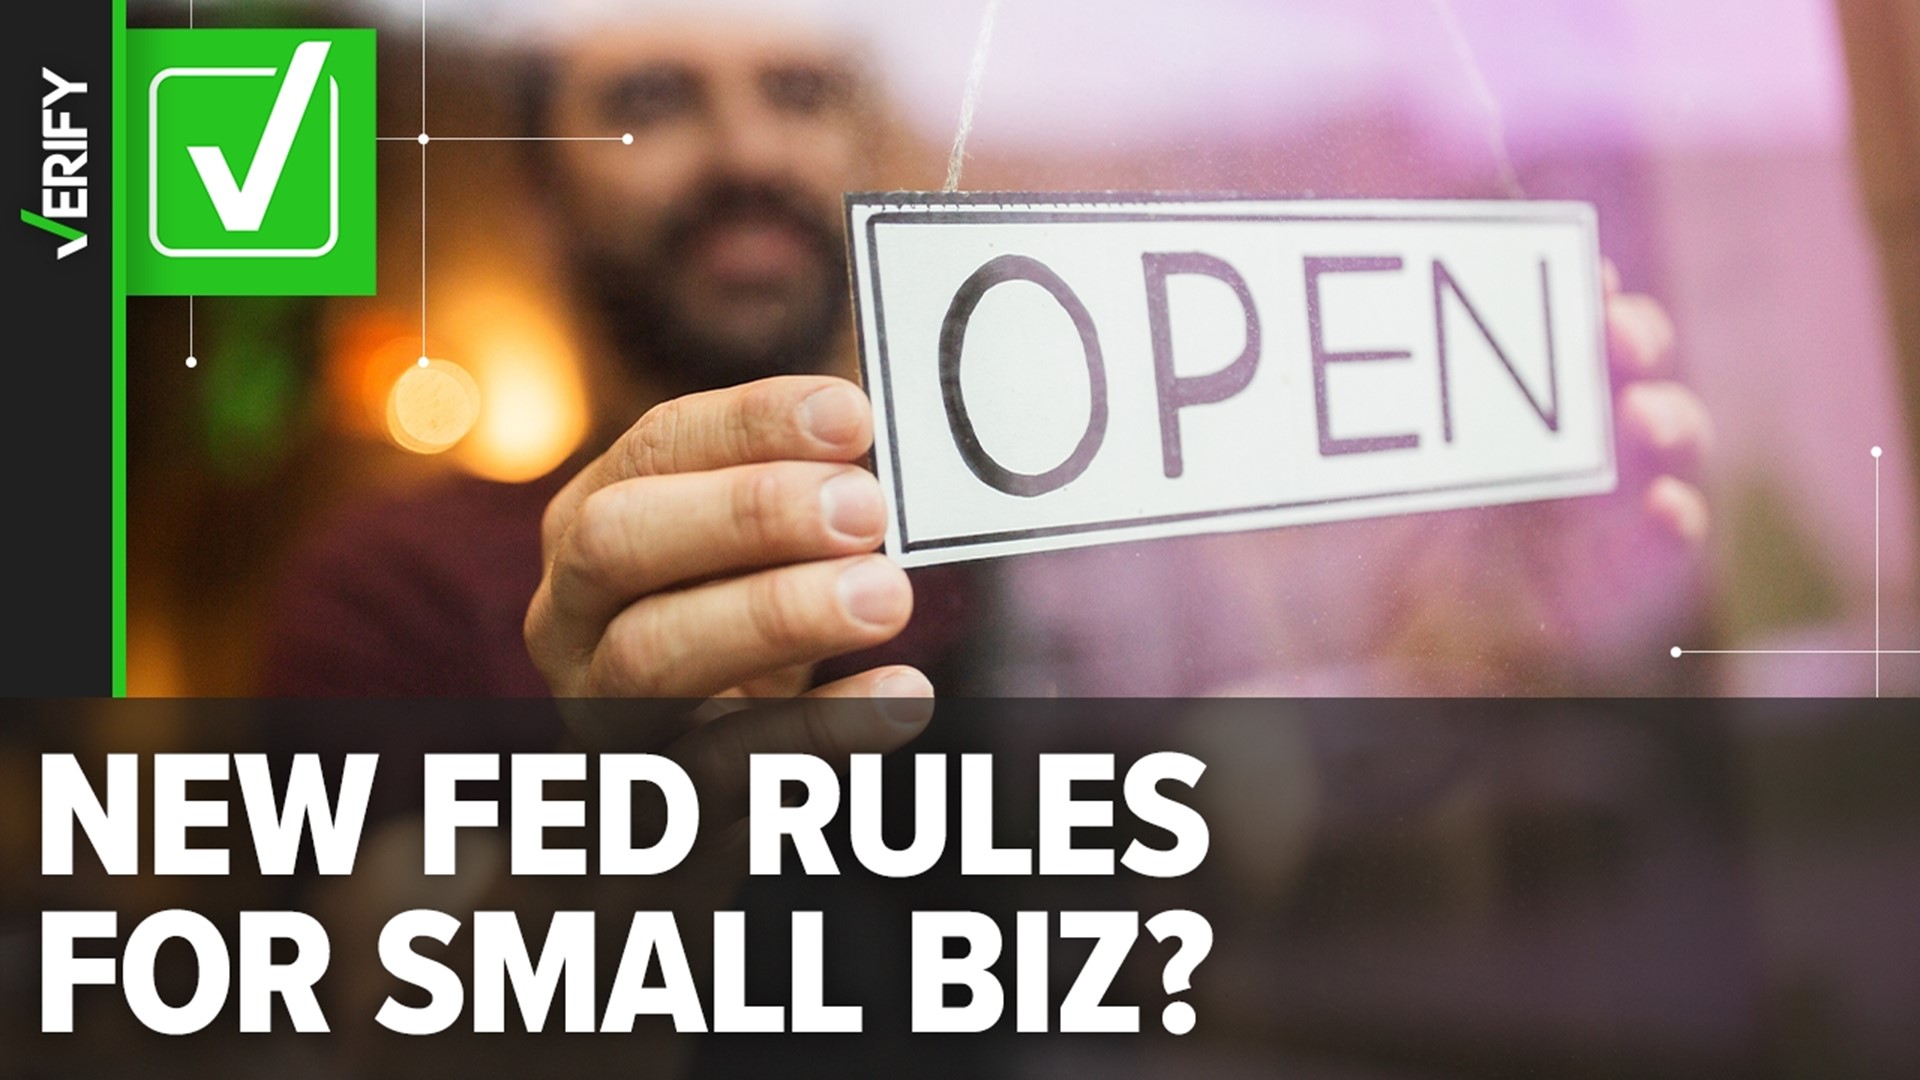 A viral video claims the government is launching surveillance of small businesses. Here are the facts about new beneficial ownership reporting requirements.